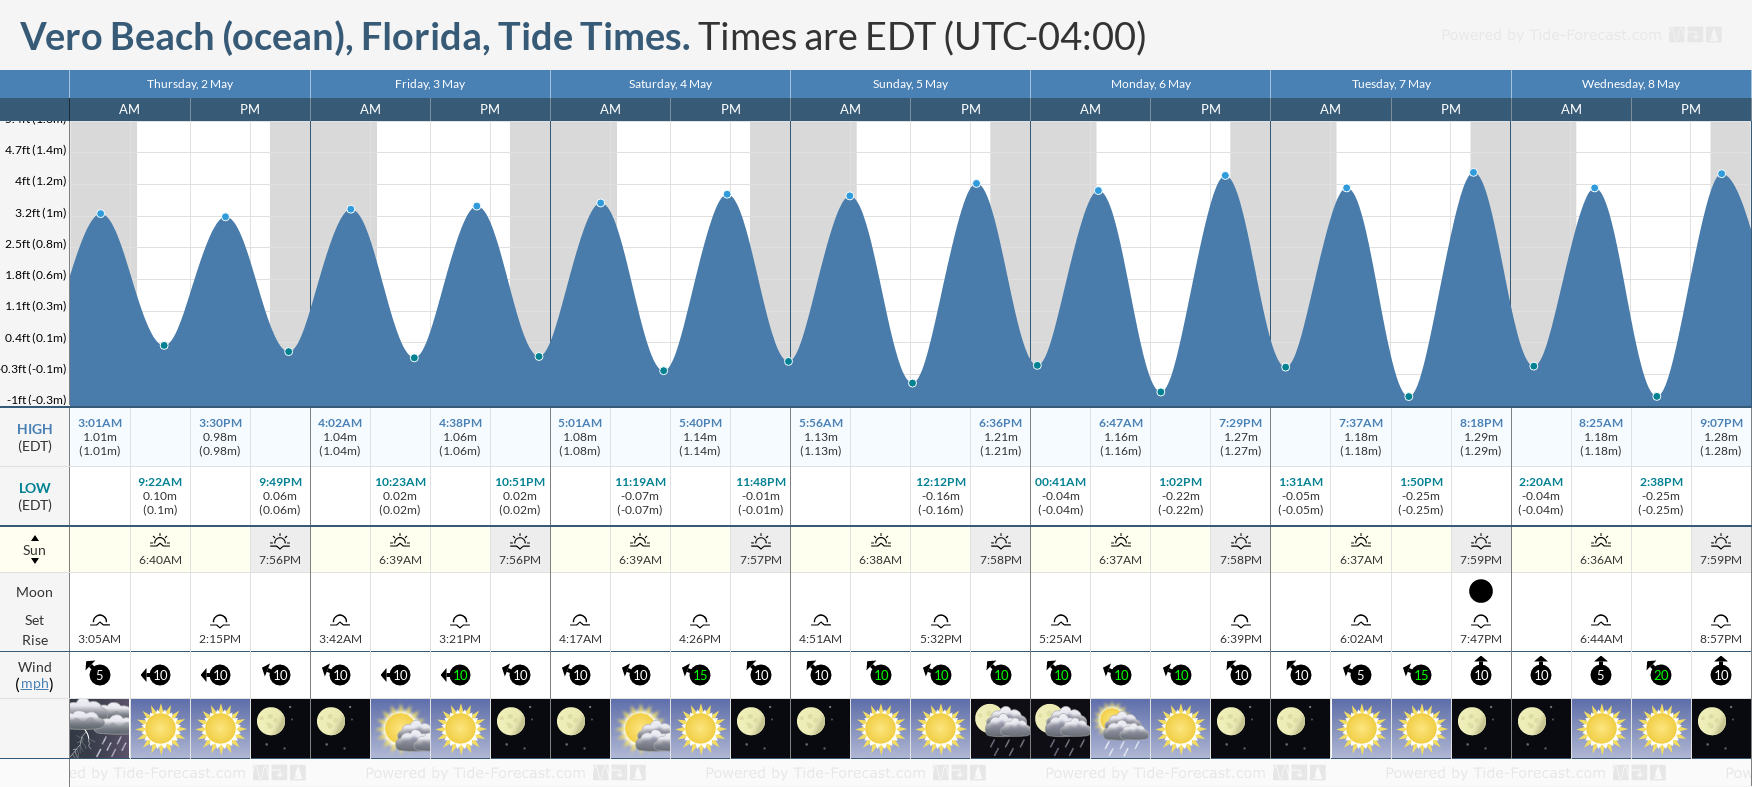 Vero Beach (ocean), Florida Tide Chart including high and low tide tide times for the next 7 days